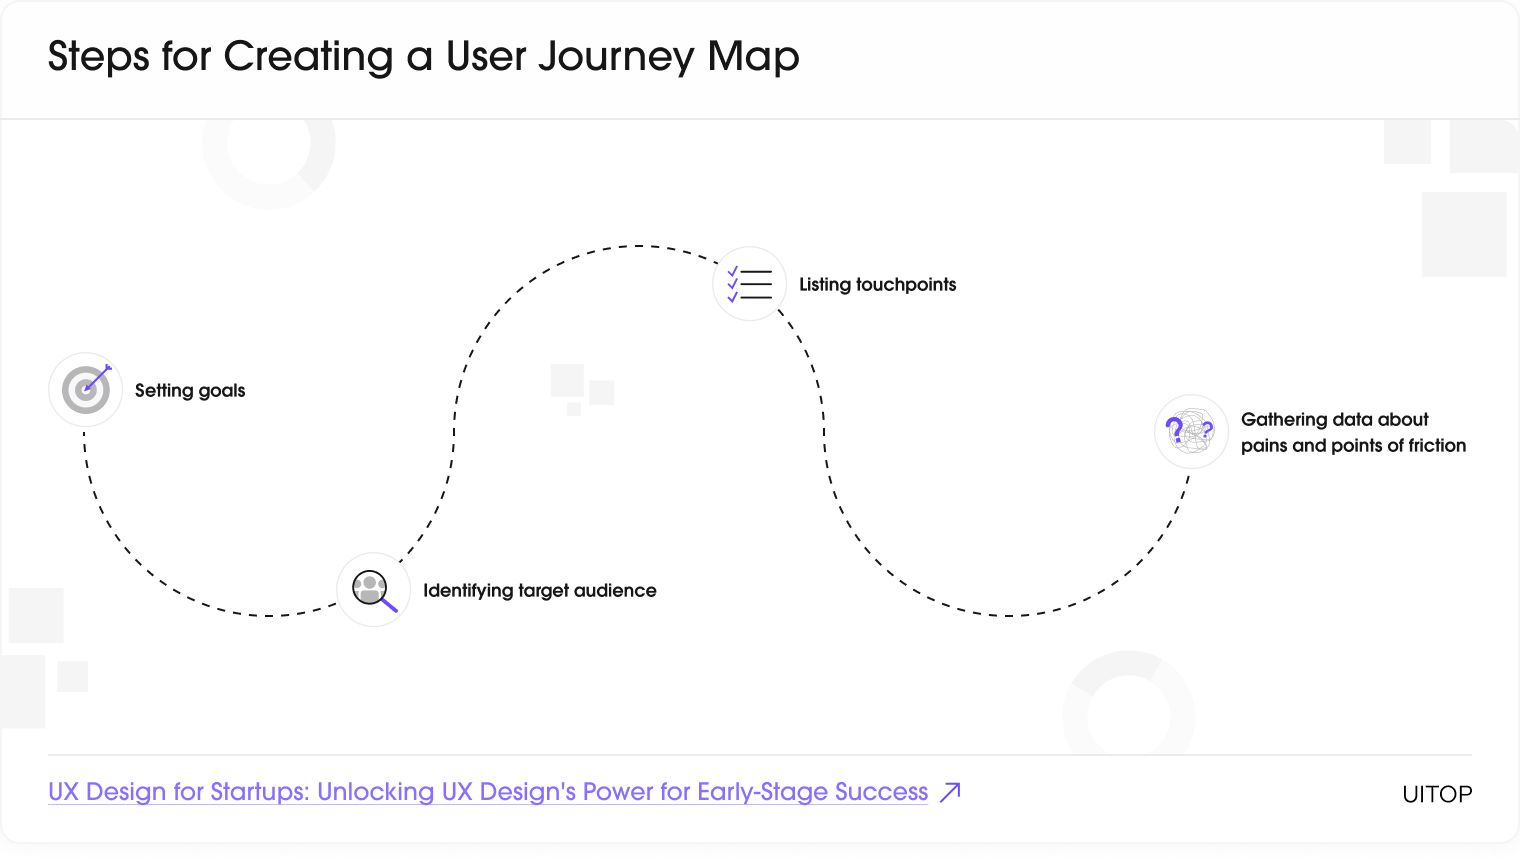 Steps for creating a user journey map